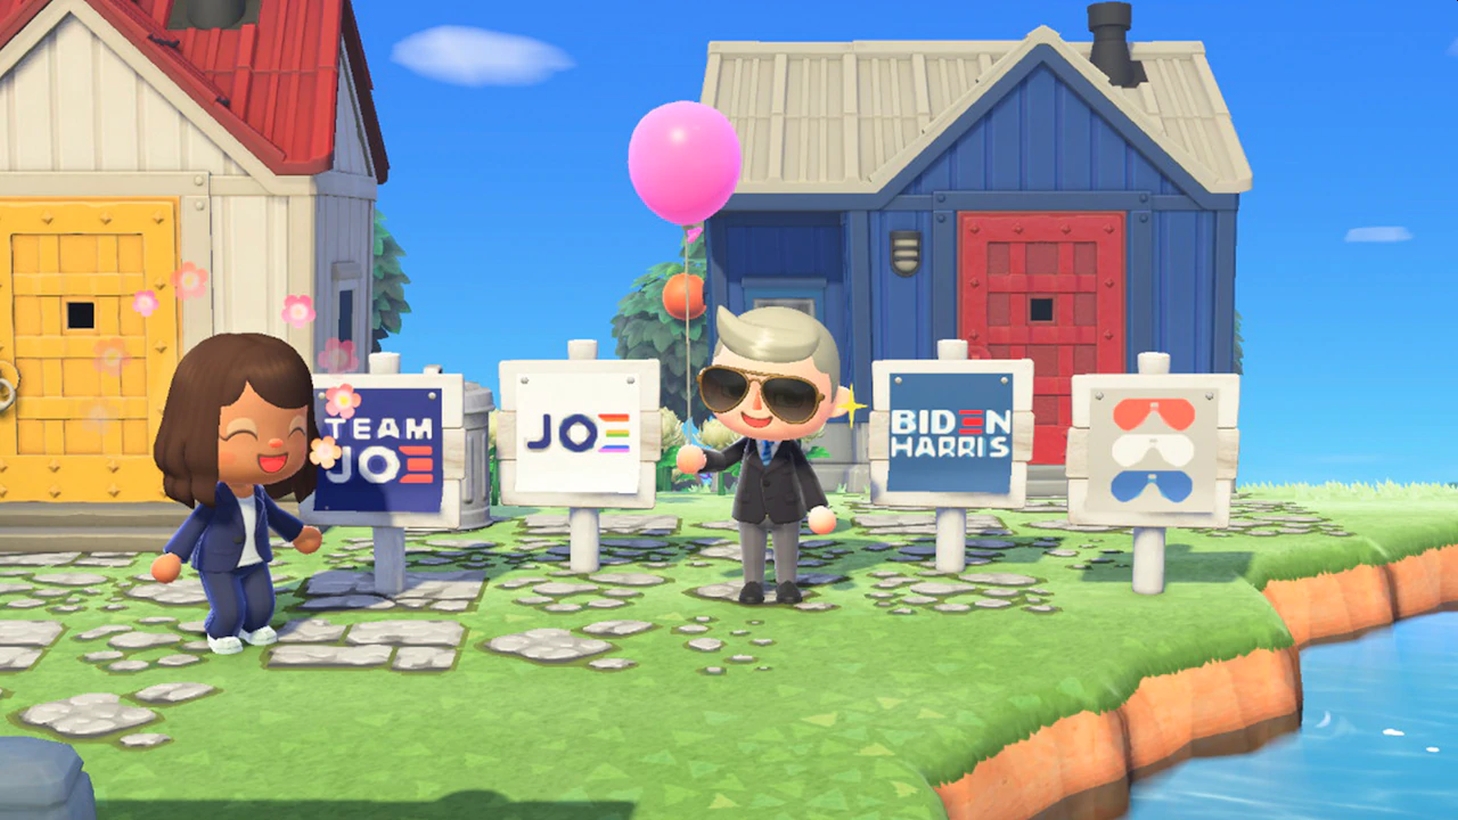 US Democrats Are Using Animal Crossing: New Horizons To Reach Young Voters